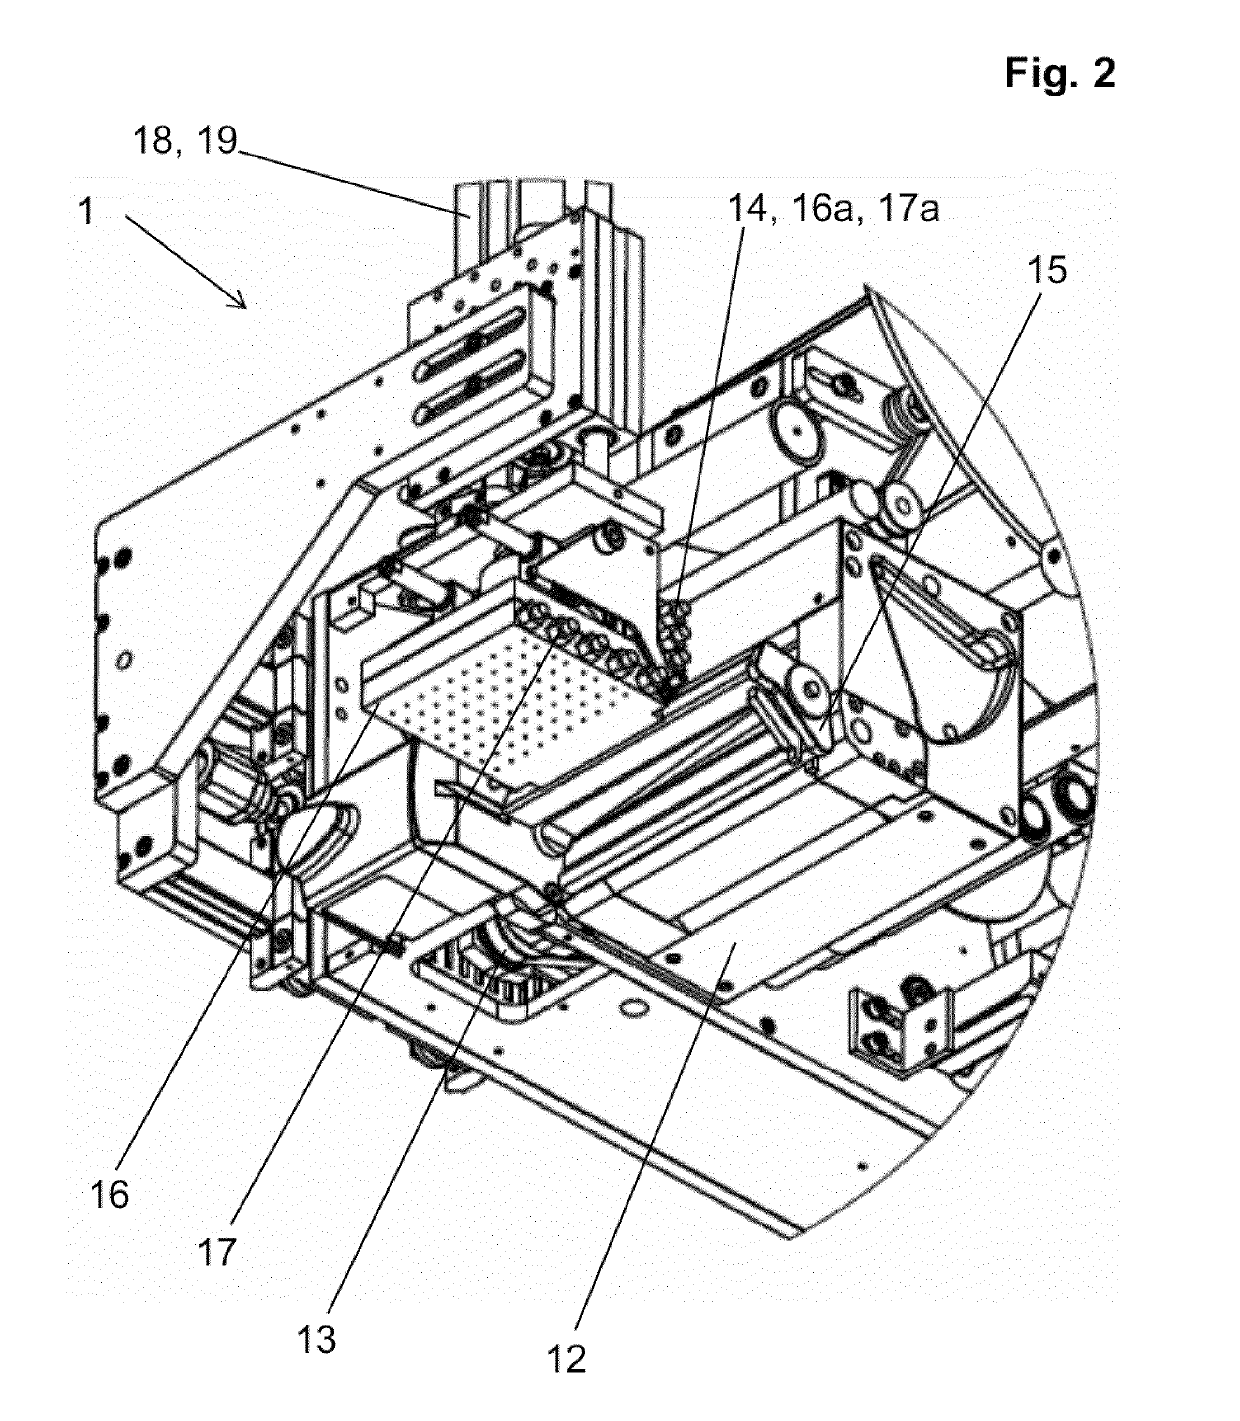 Device for printing, severing and applying self-adhesive flat structures, in particular labels